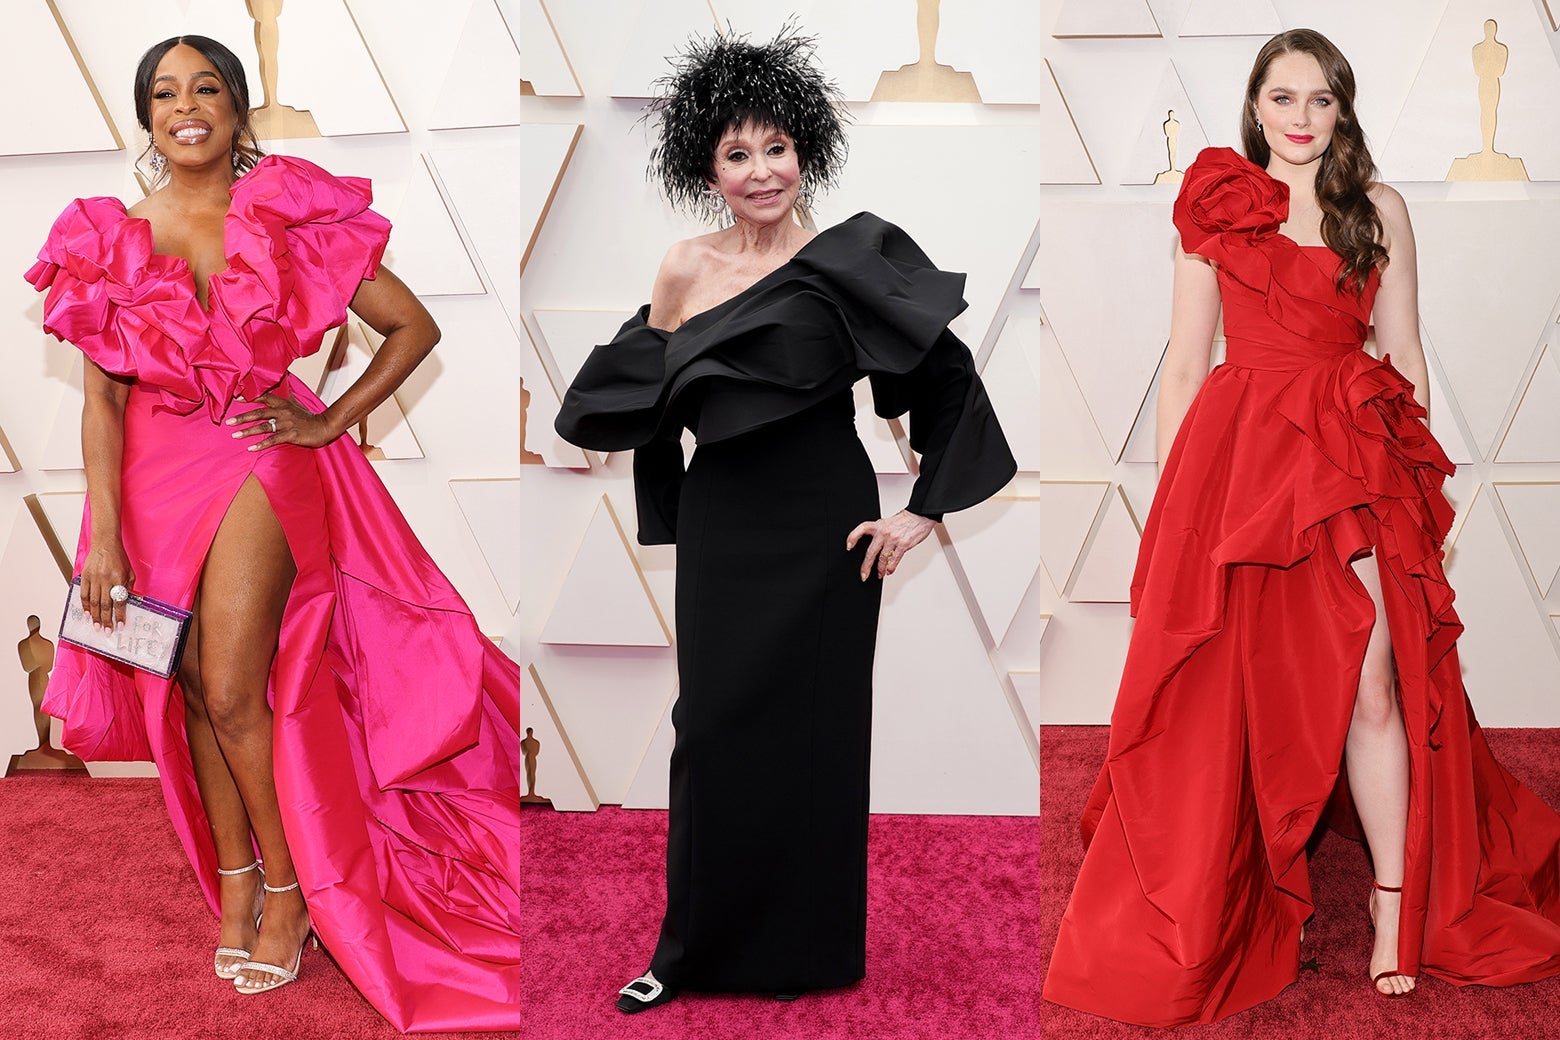 Niecy Nash, Rita Moreno, and Amy Forsyth on the Oscars red carpet.